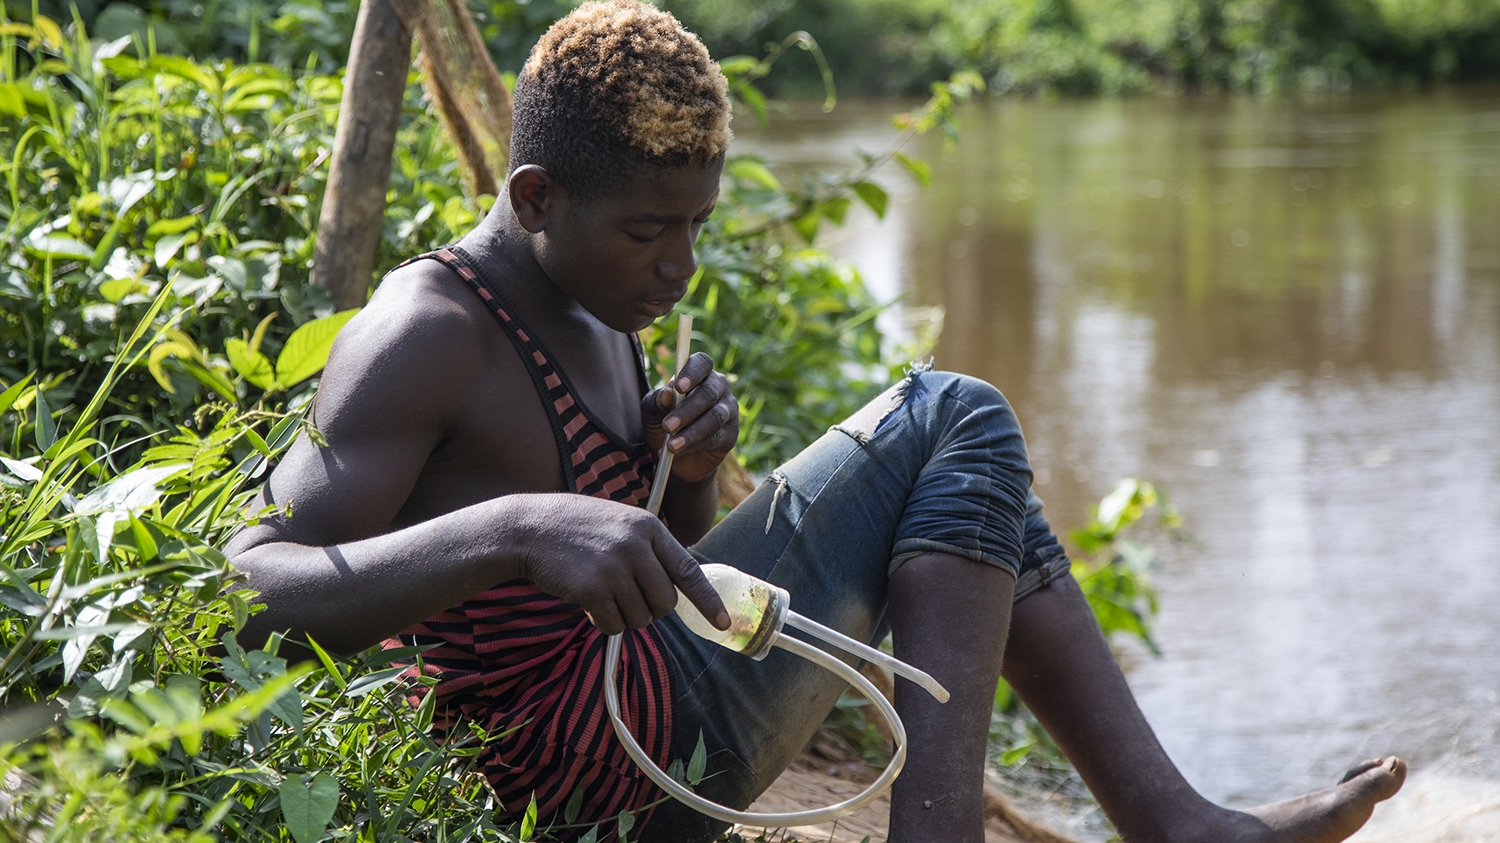 A young man catches black flies on his leg at the edge of a river.